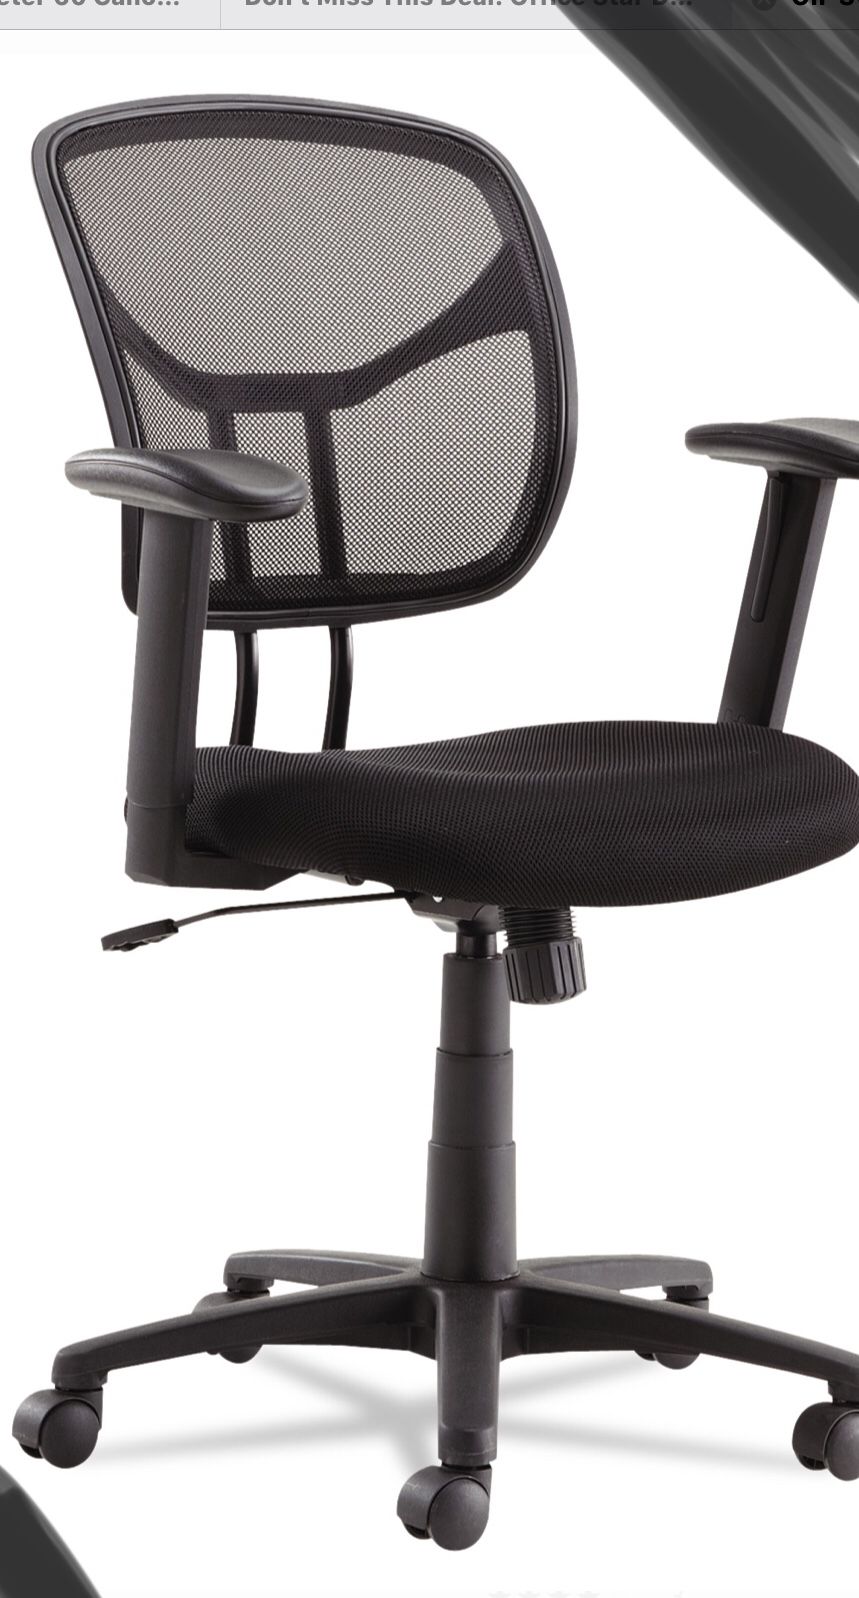 New!! Office chair, desk’s chair, office furniture